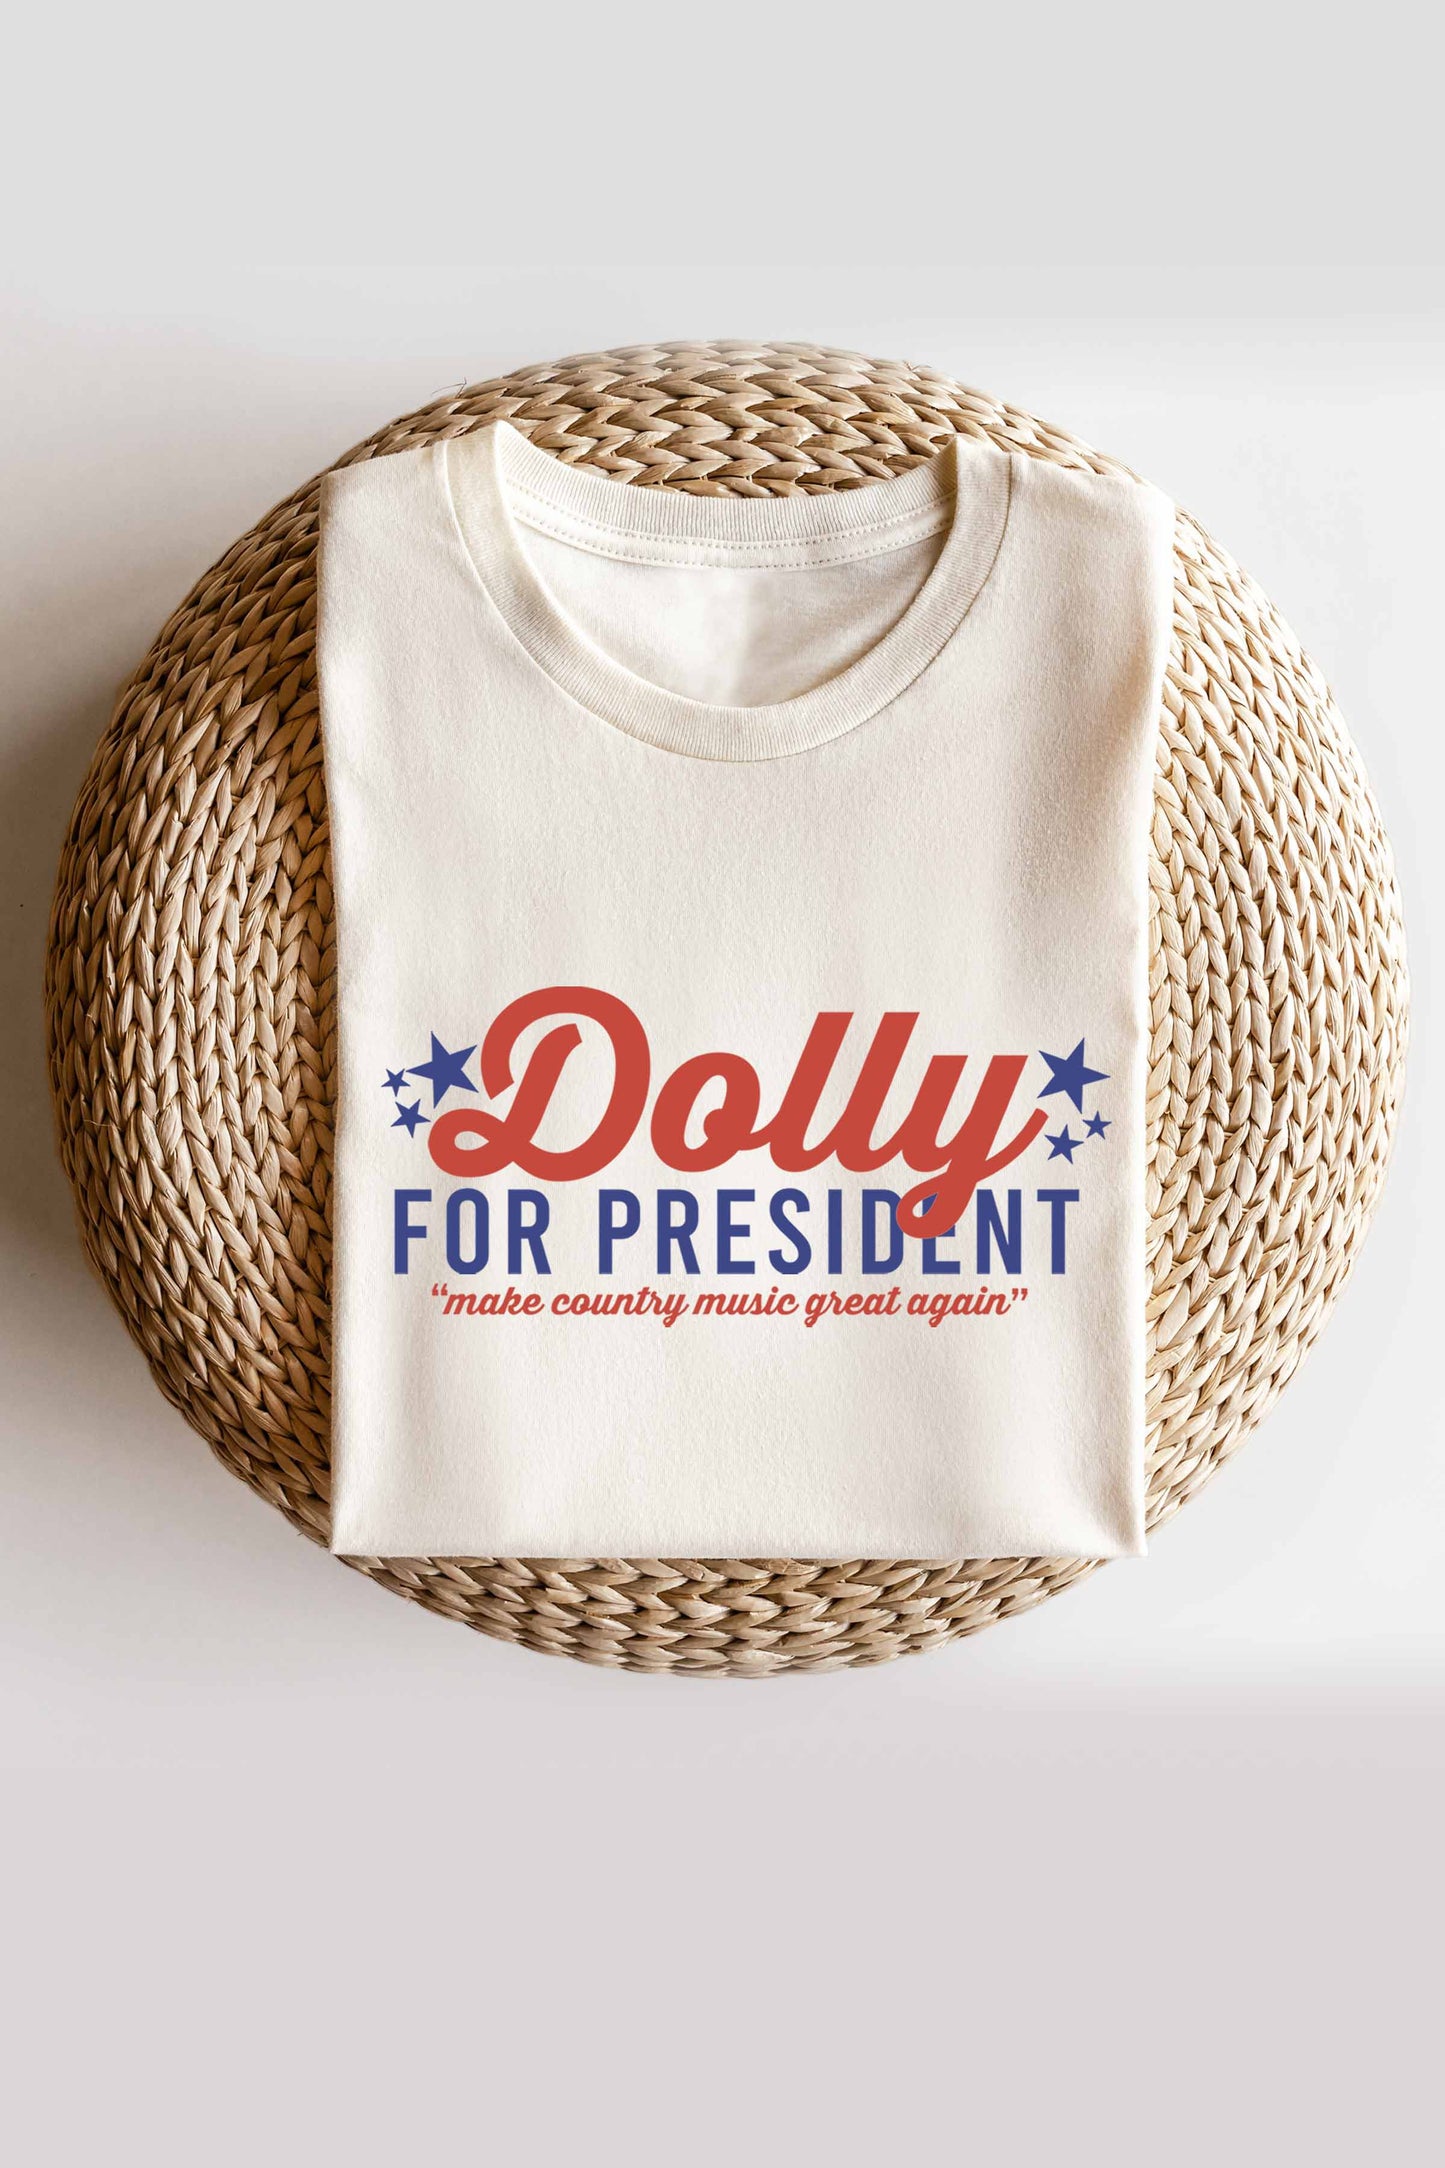 "Dolly for President" Graphic Tee